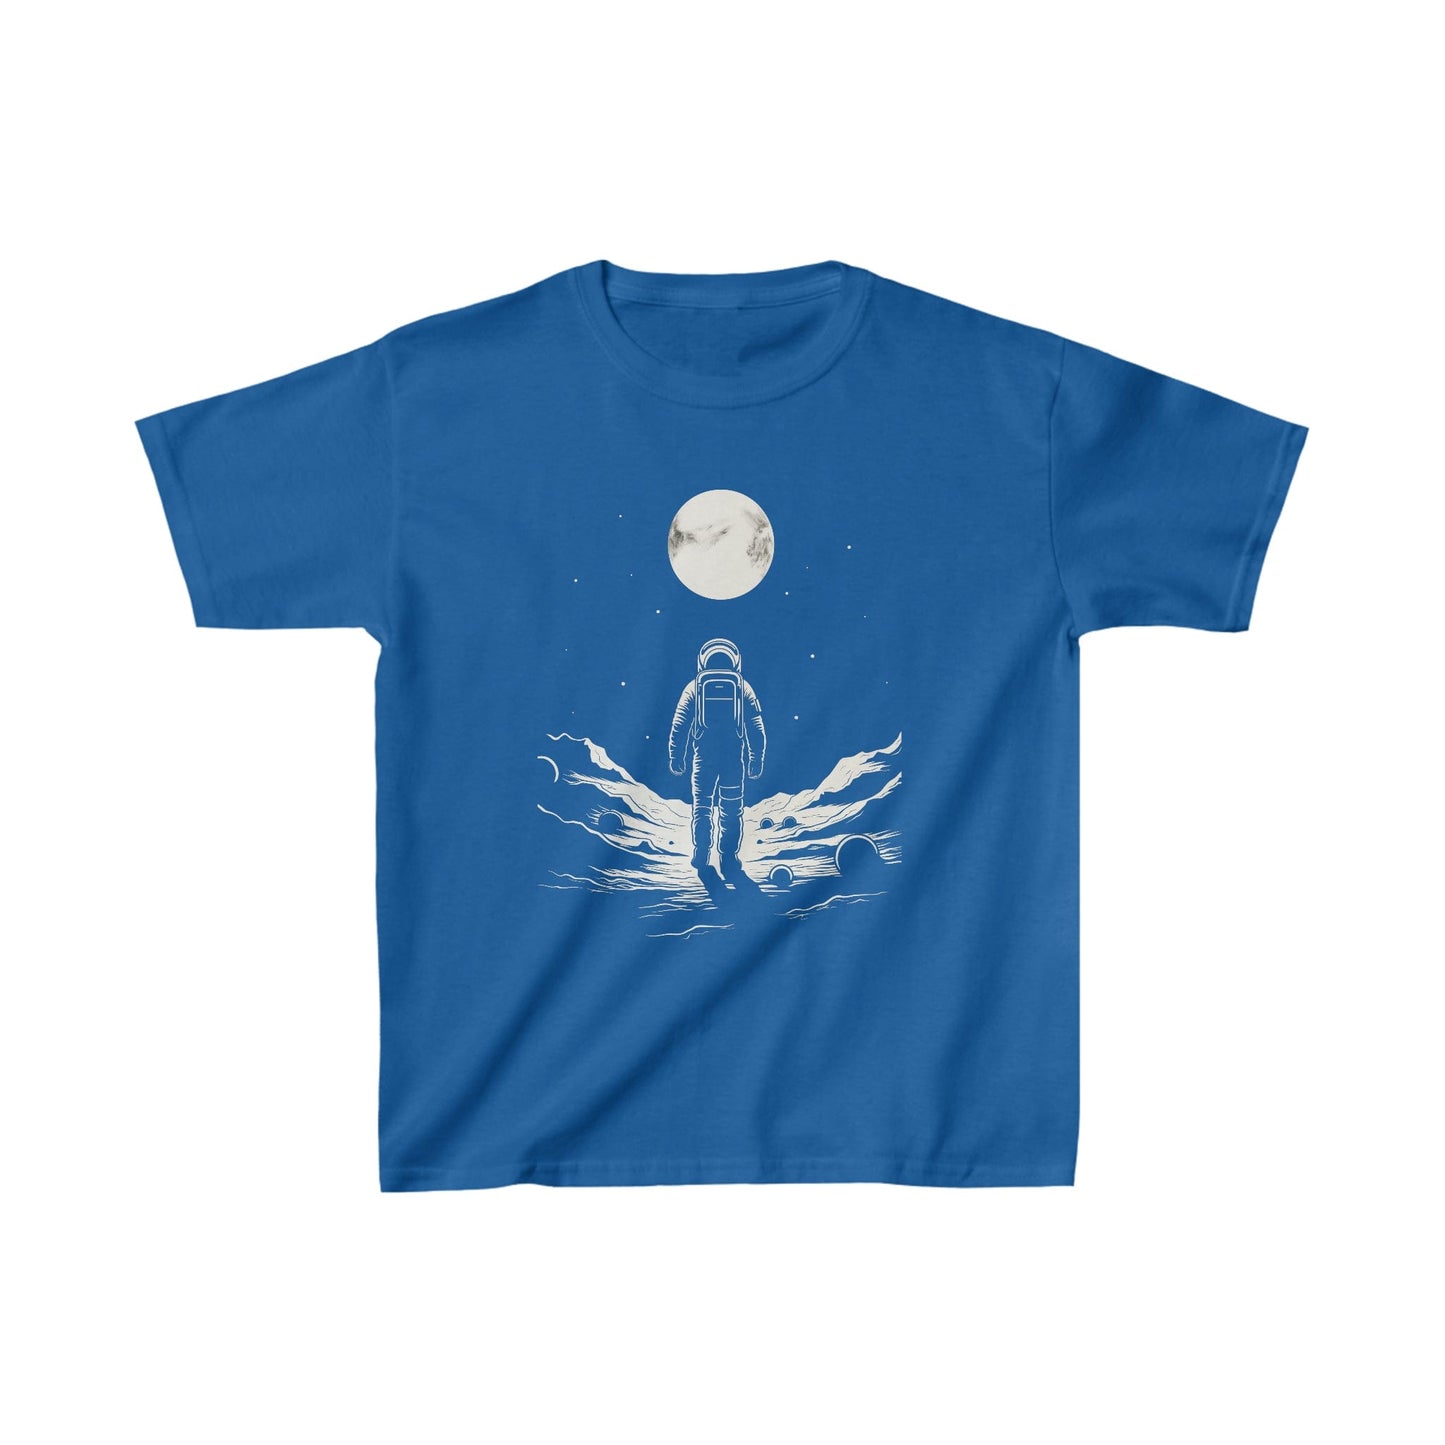 Kids clothes XS / Royal Youth Lone Astronaut Moon Explorer T-Shirt